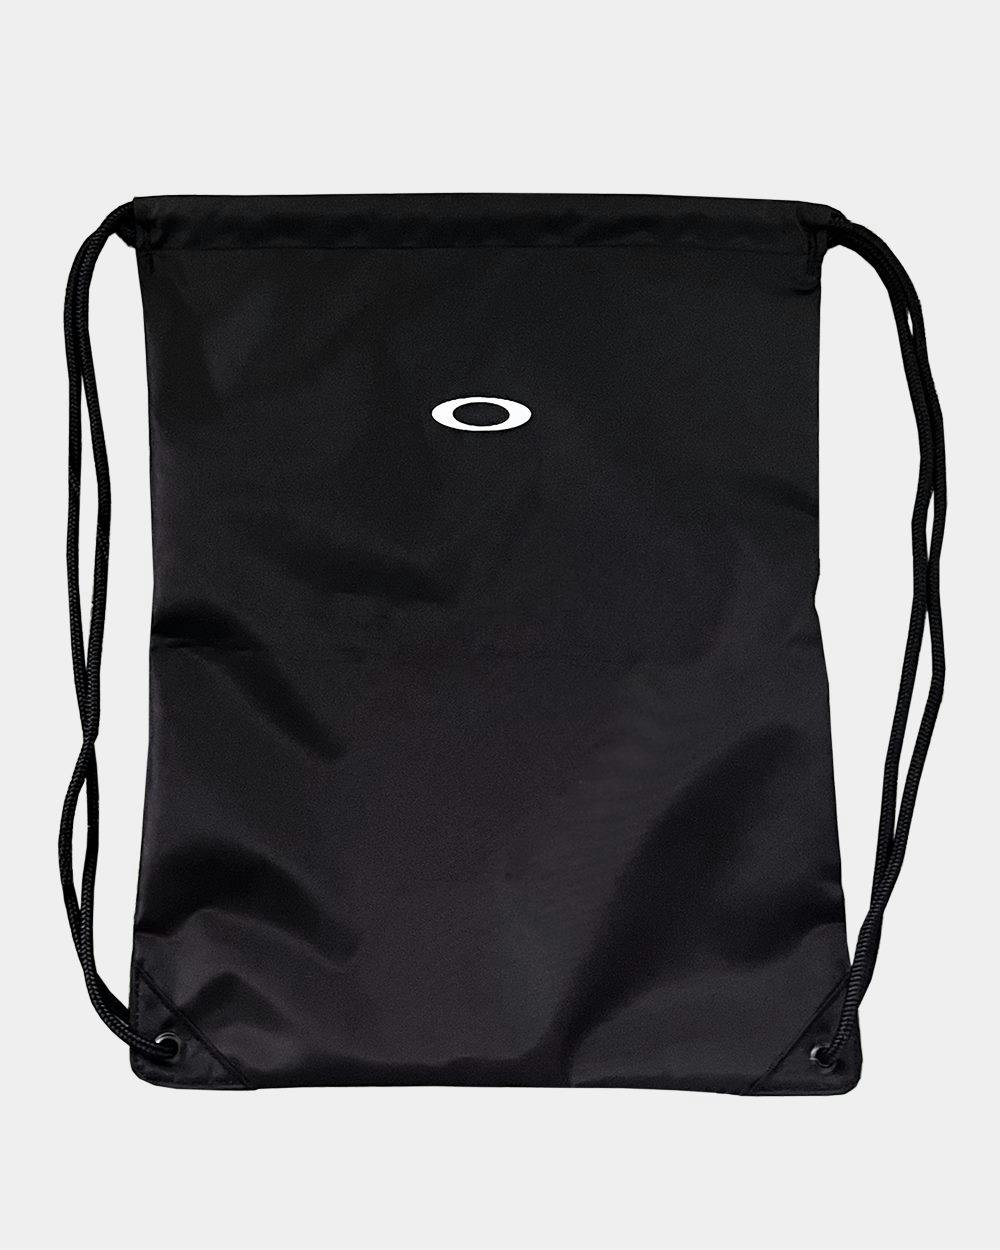 Image for Team Issue Drawstring Backpack - FOS901632